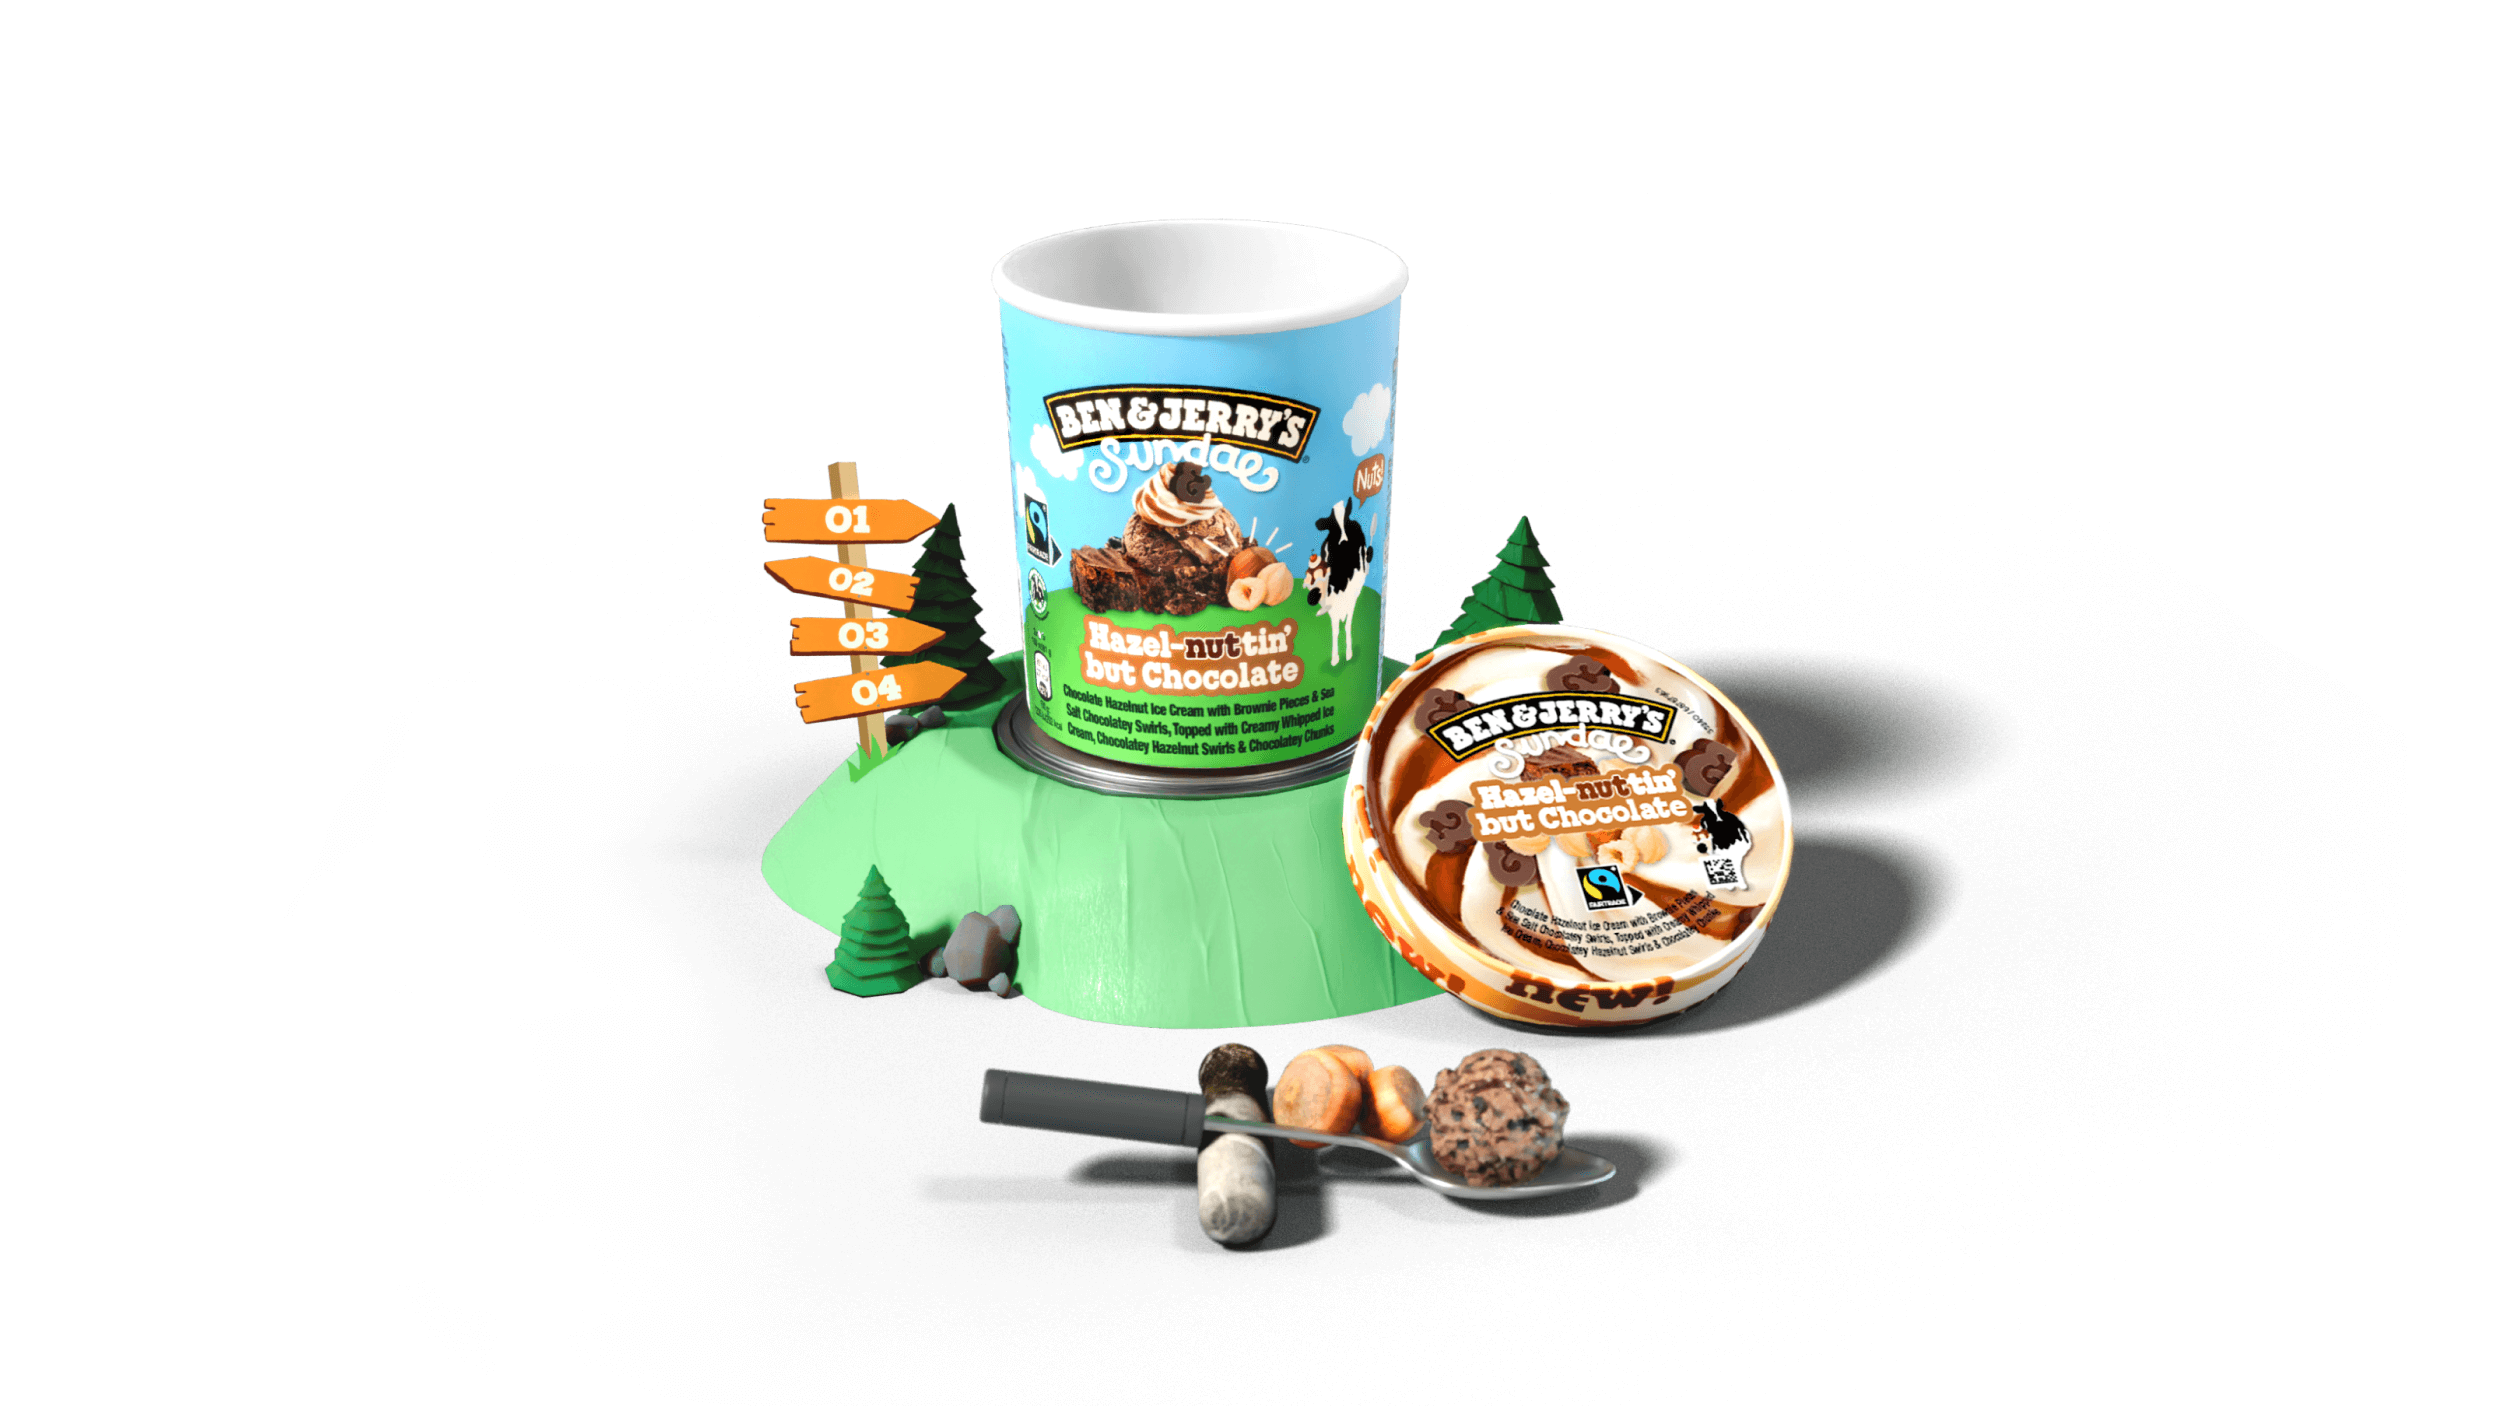 3D spoon and tub of Ben & Jerry's Sundae sitting on a hill